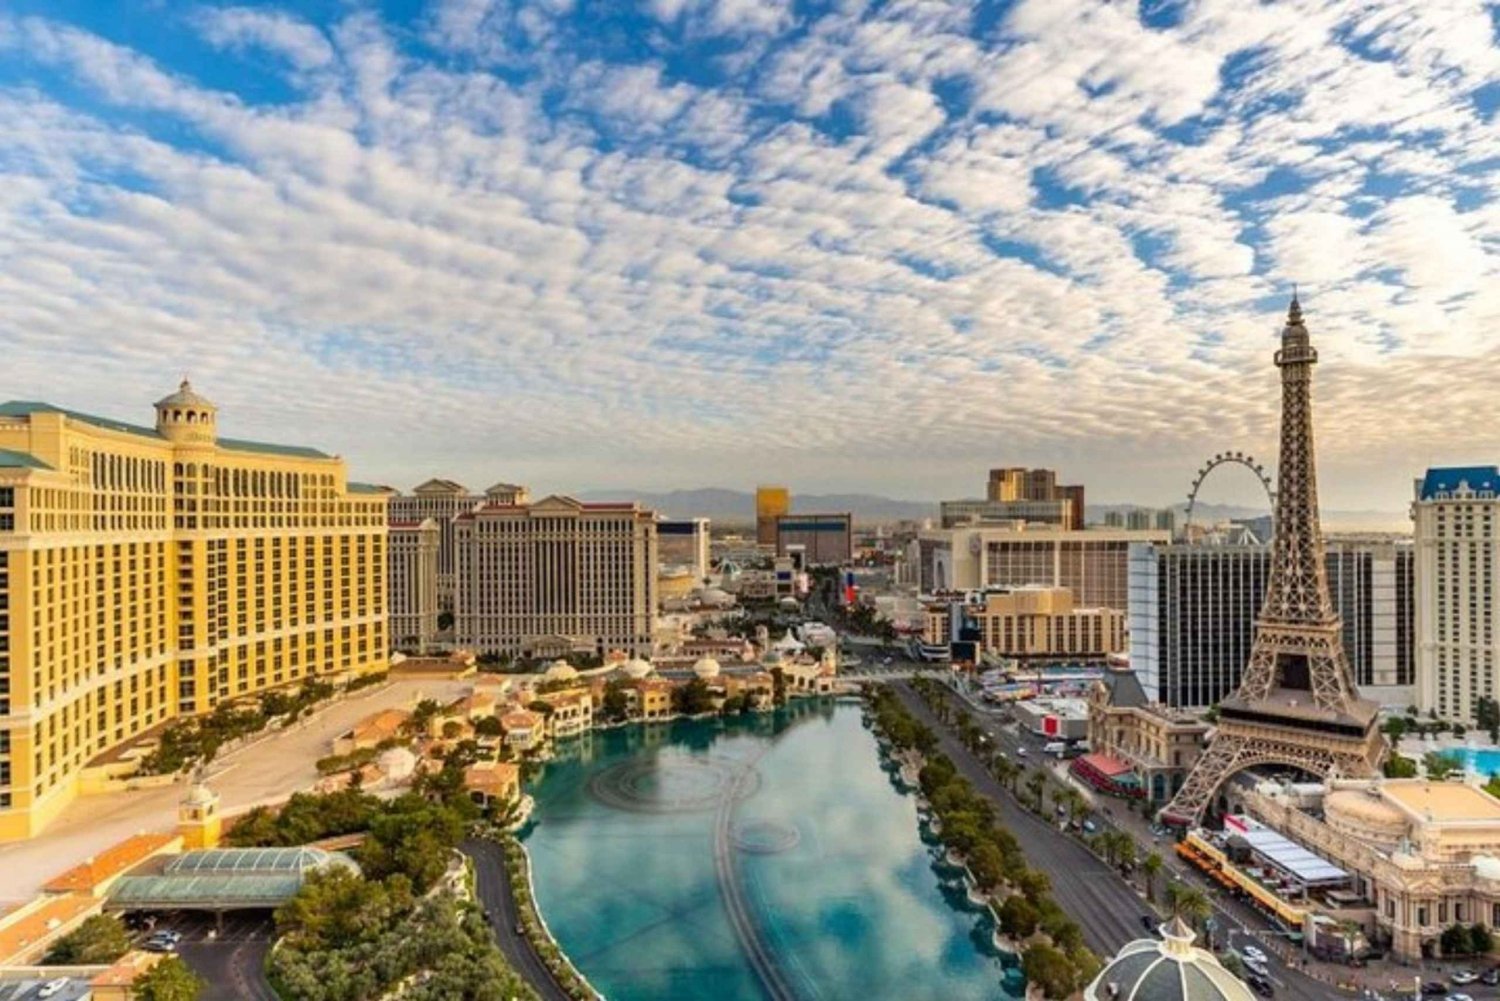 Las Vegas: Private custom tour with a local guide